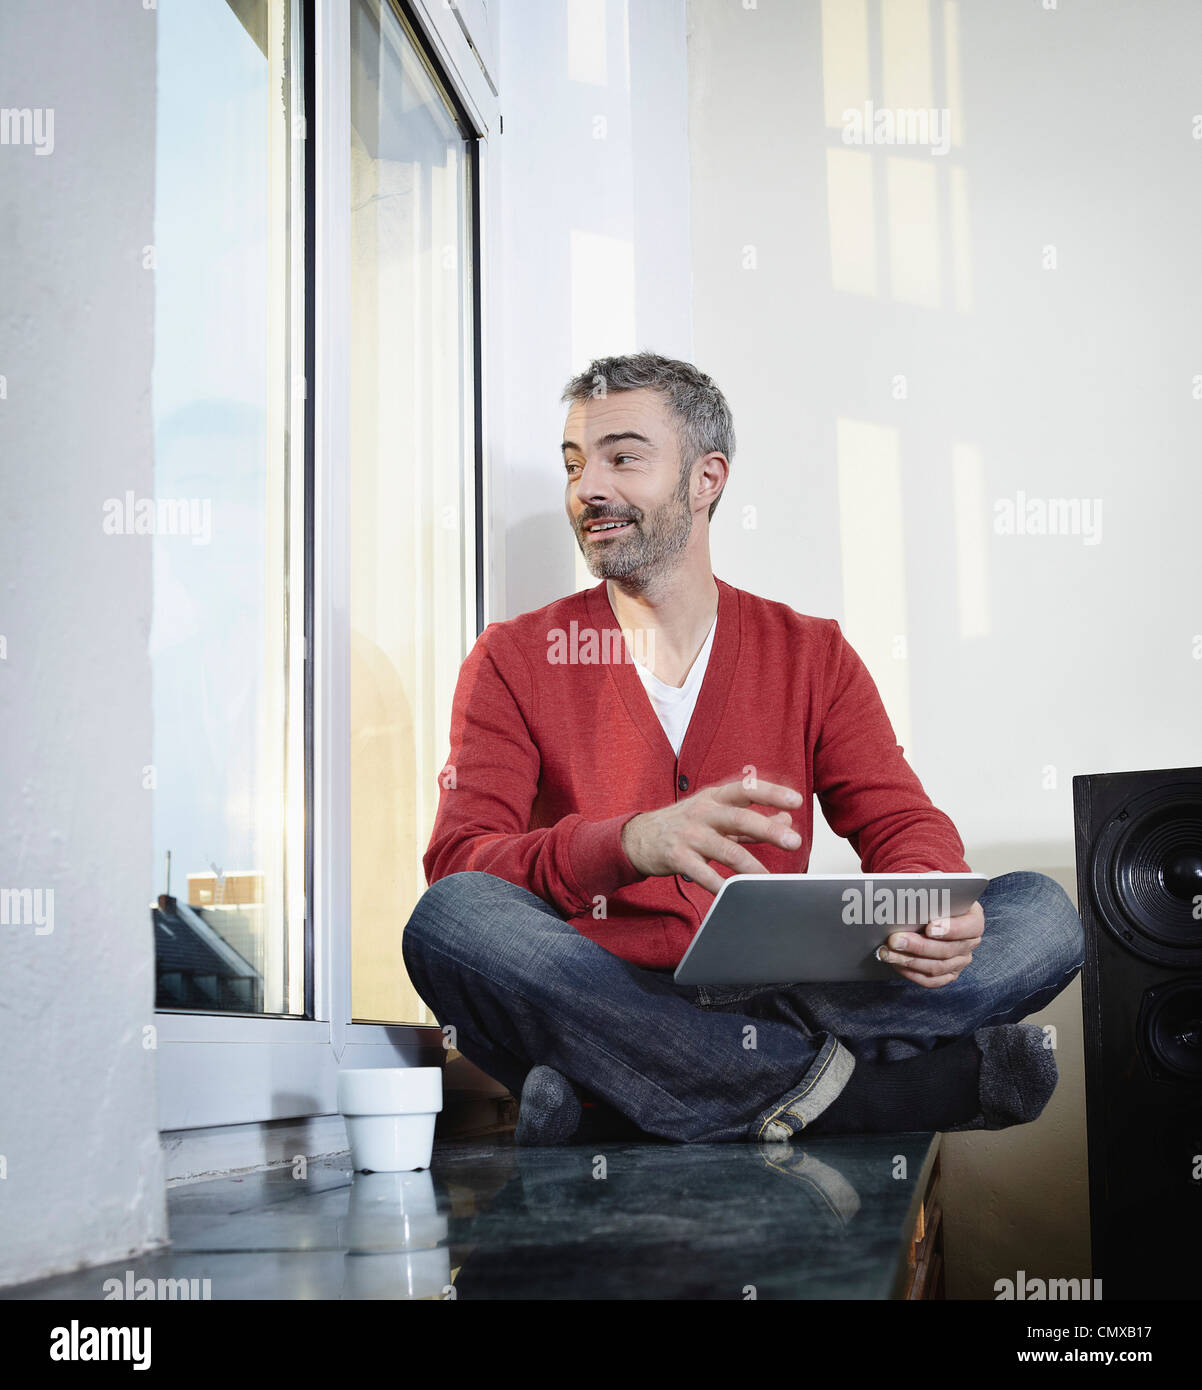 Germany, Cologne, Mature man sitting at window with digital tablet, smiling Stock Photo